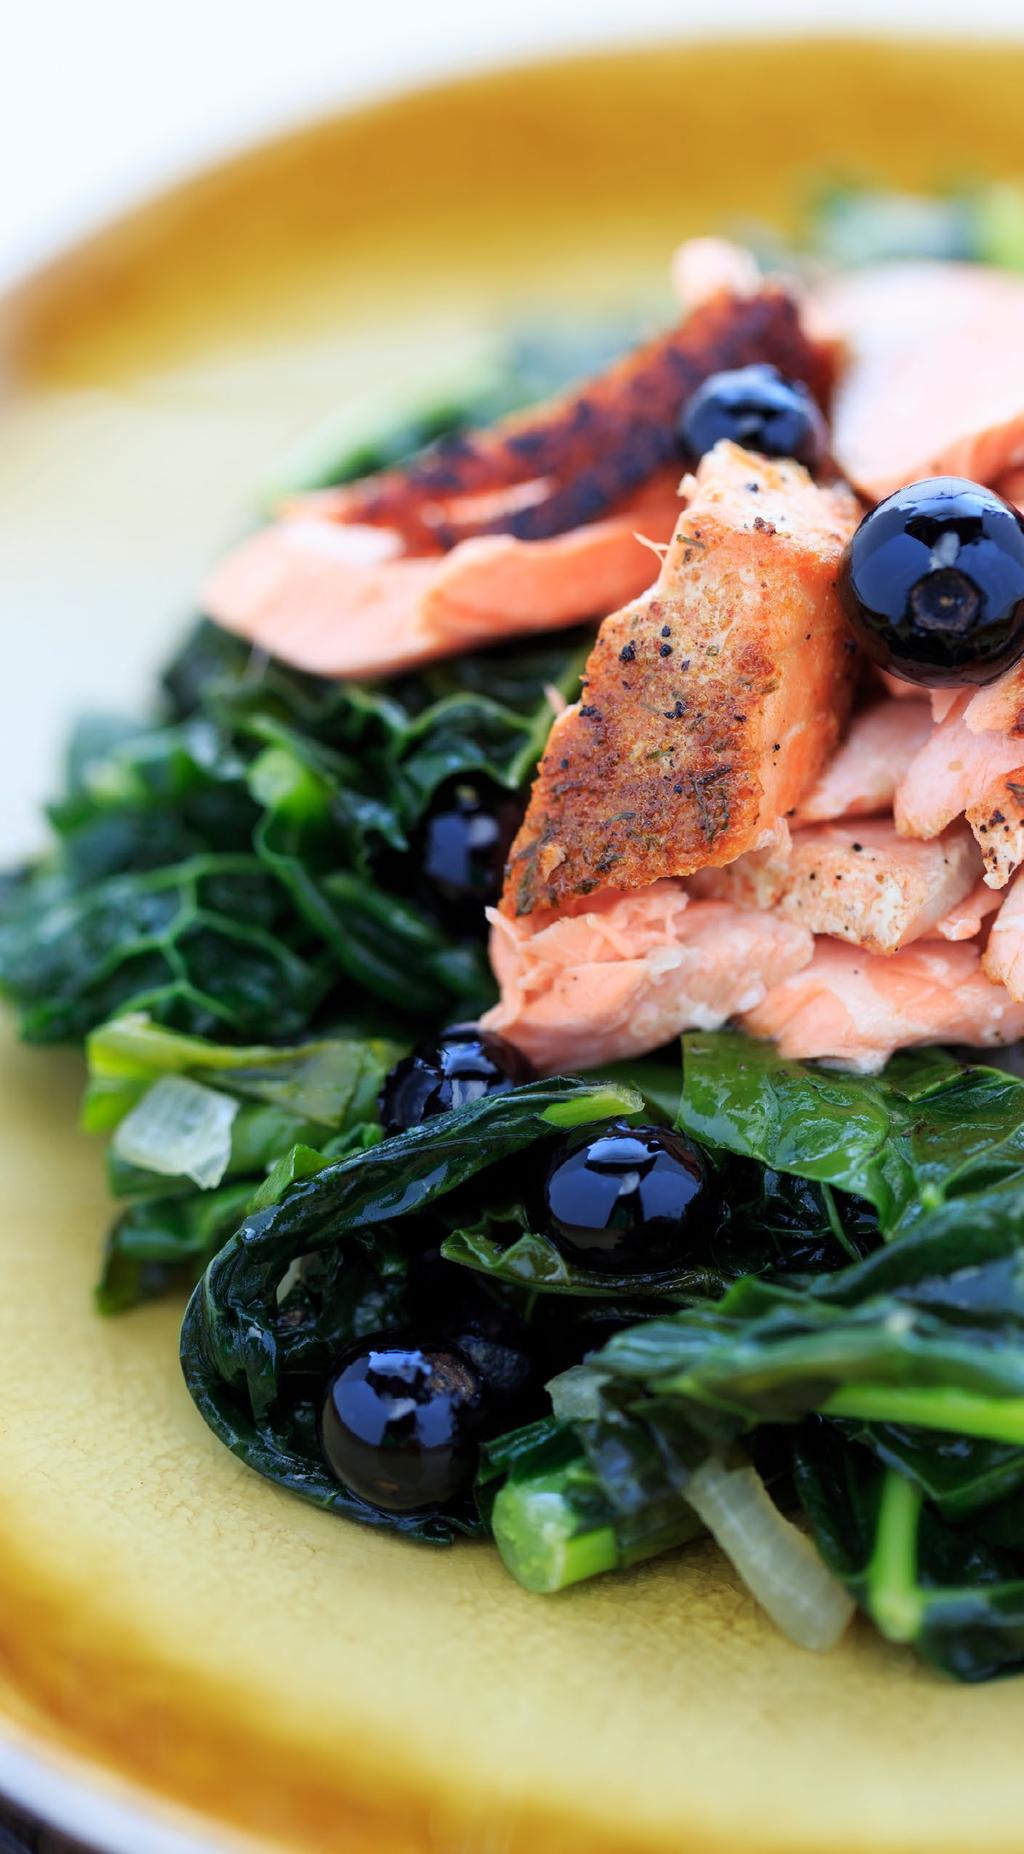 ROASTED SALMON WITH BLUEBERRIES 4 SERVINGS 1½ to 2 pounds filet of wild salmon 3 tablespoons extra-virgin olive oil 1 lemon 2 cloves garlic 1 pint fresh blueberries (or approximately 2 cups frozen